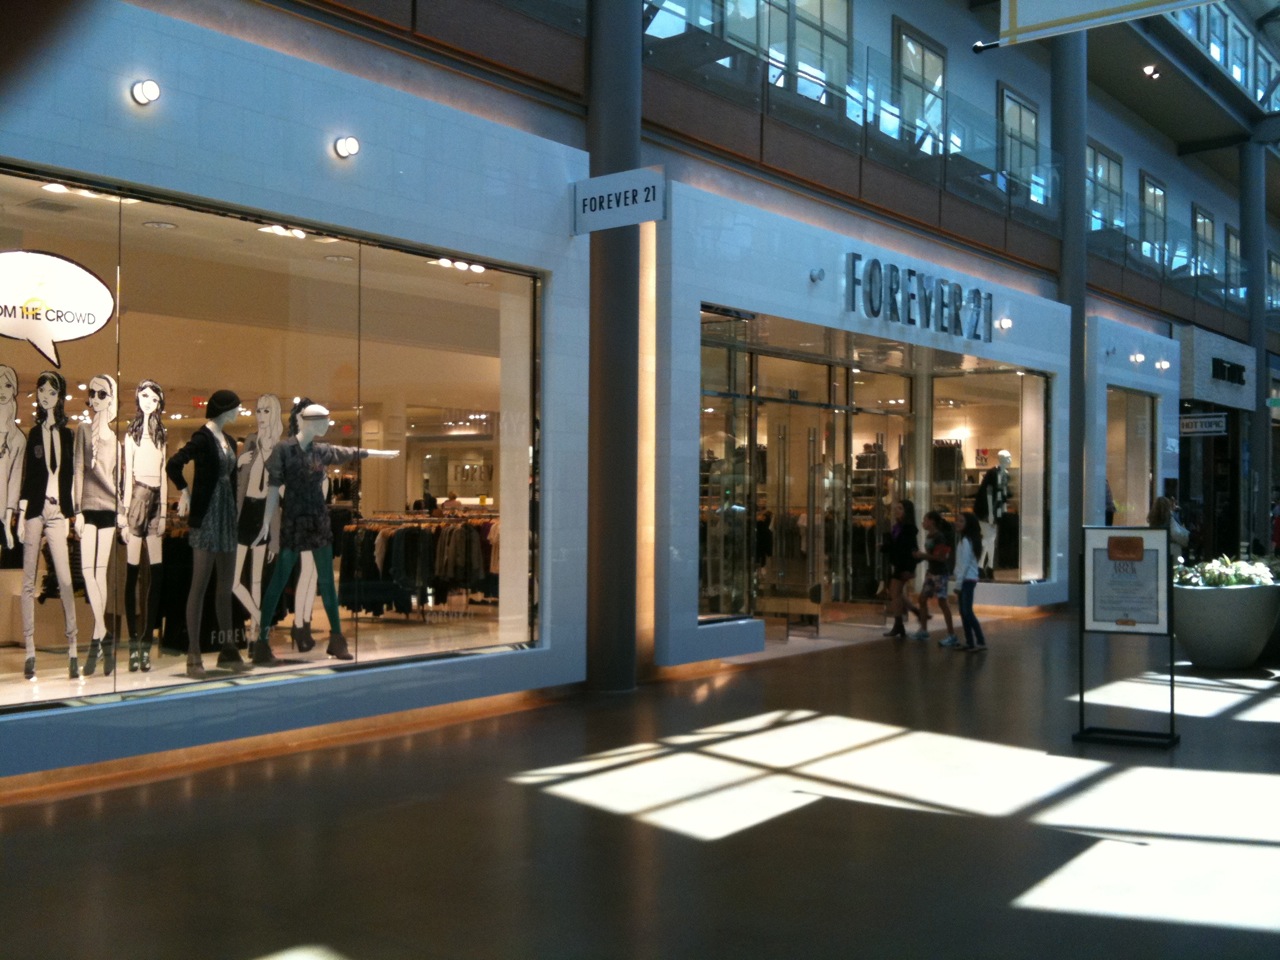 ... my first look at the new Forever 21 store at Northgate Mall last